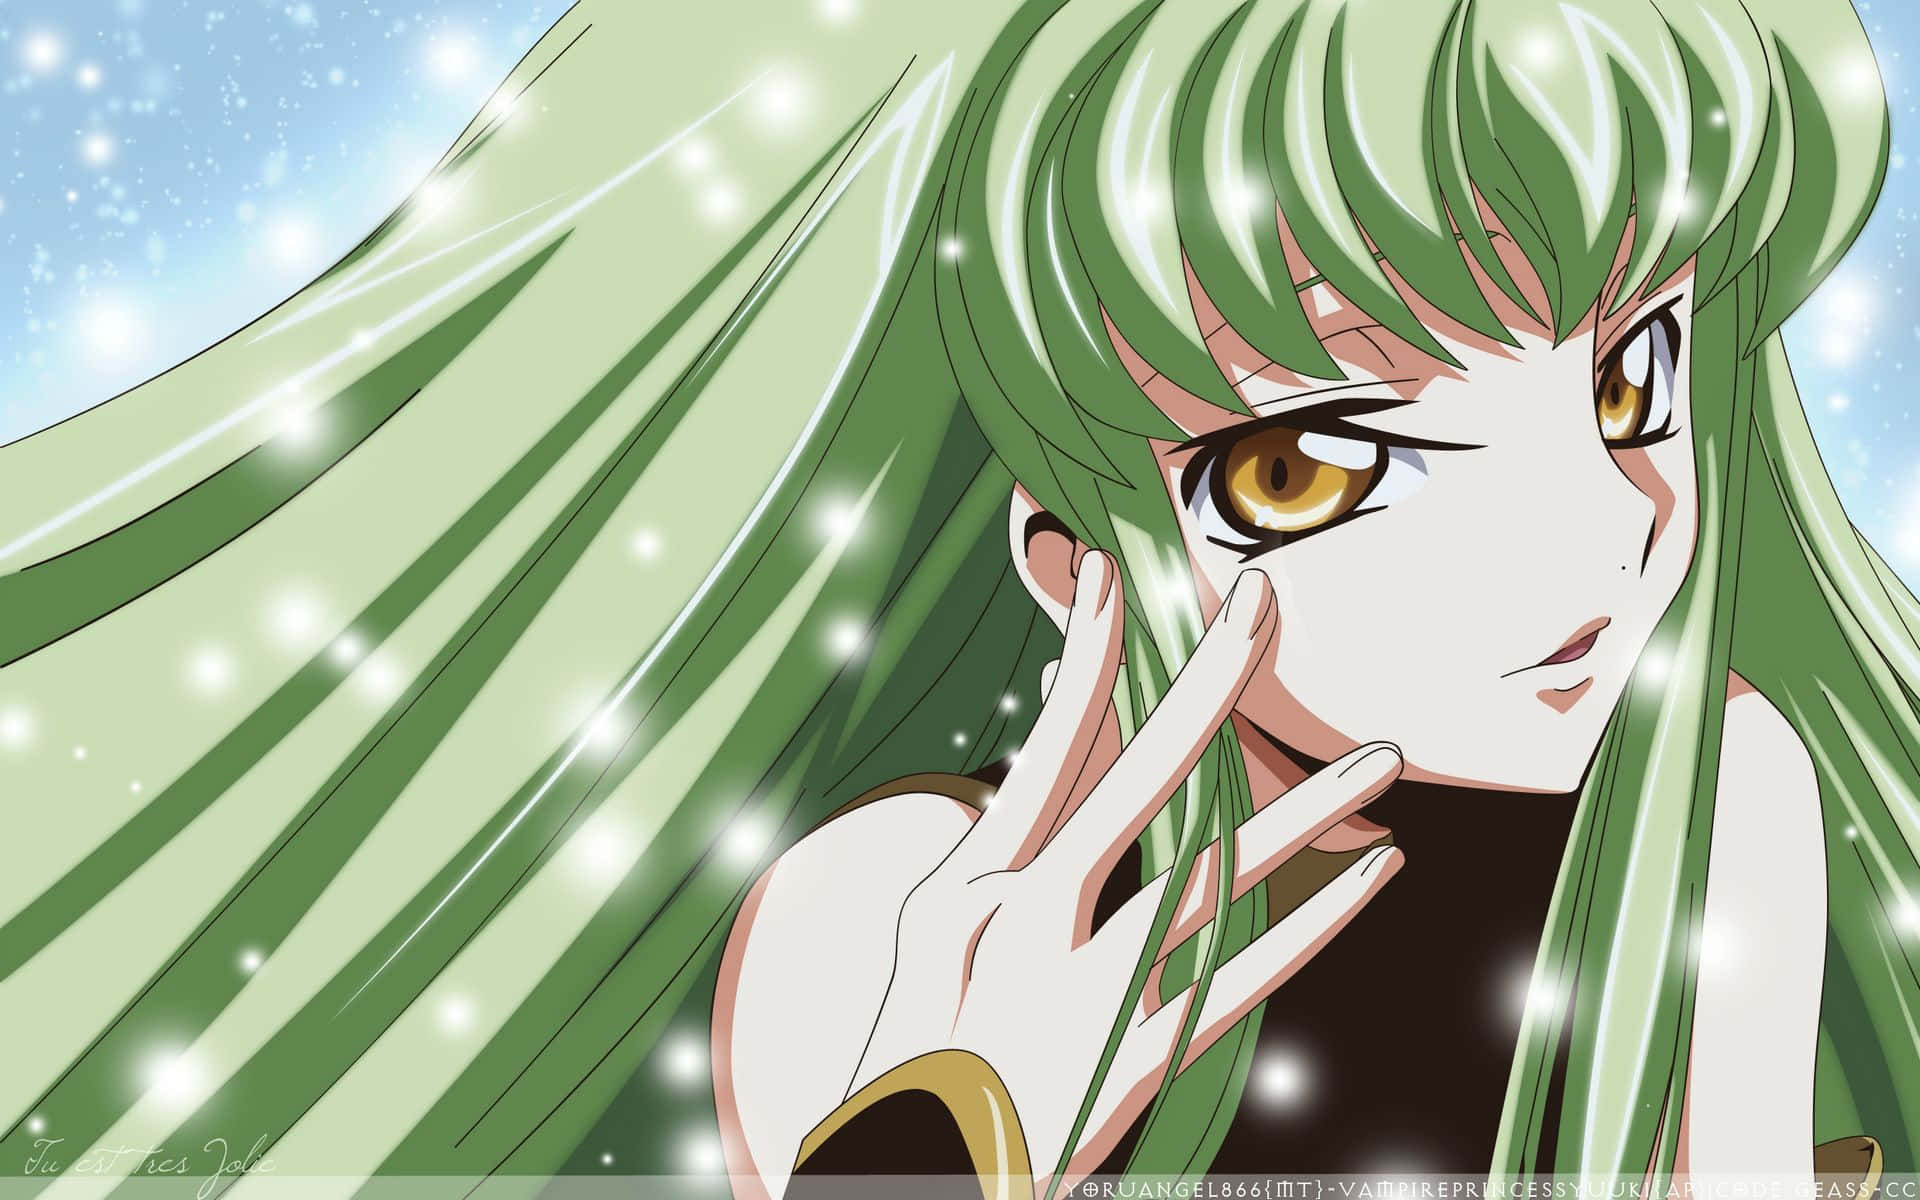 "Go enjoy that cheesy romance anime in style with this cute aesthetic anime desktop wallpaper" Wallpaper